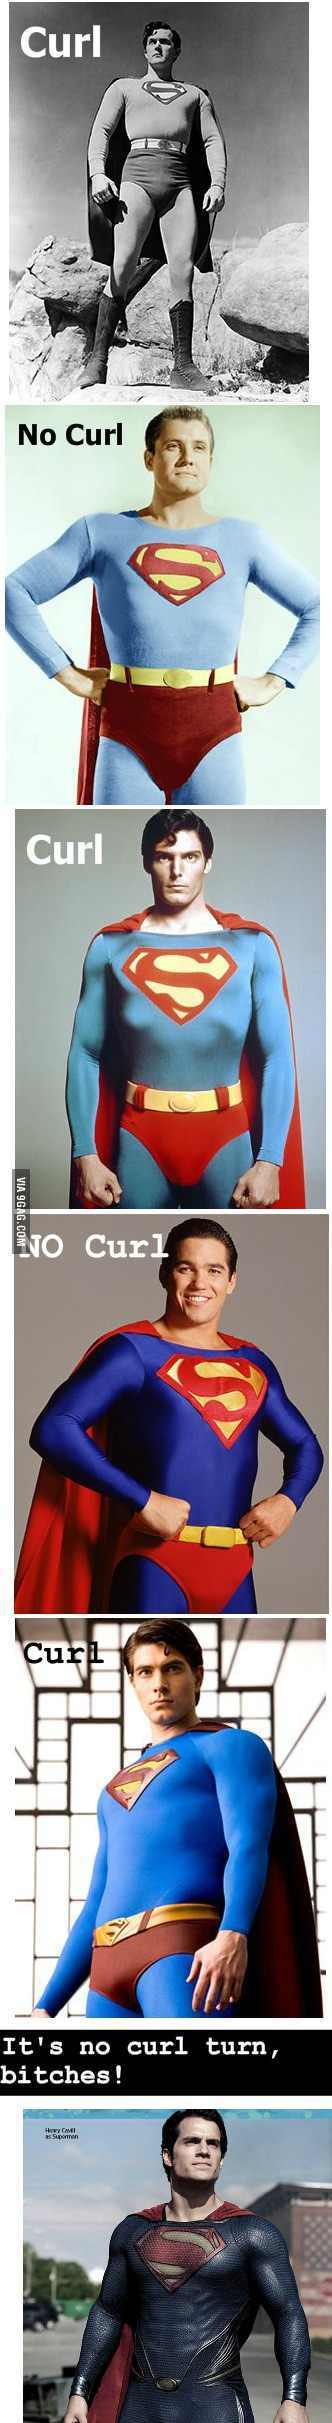 no curl this time! - meme